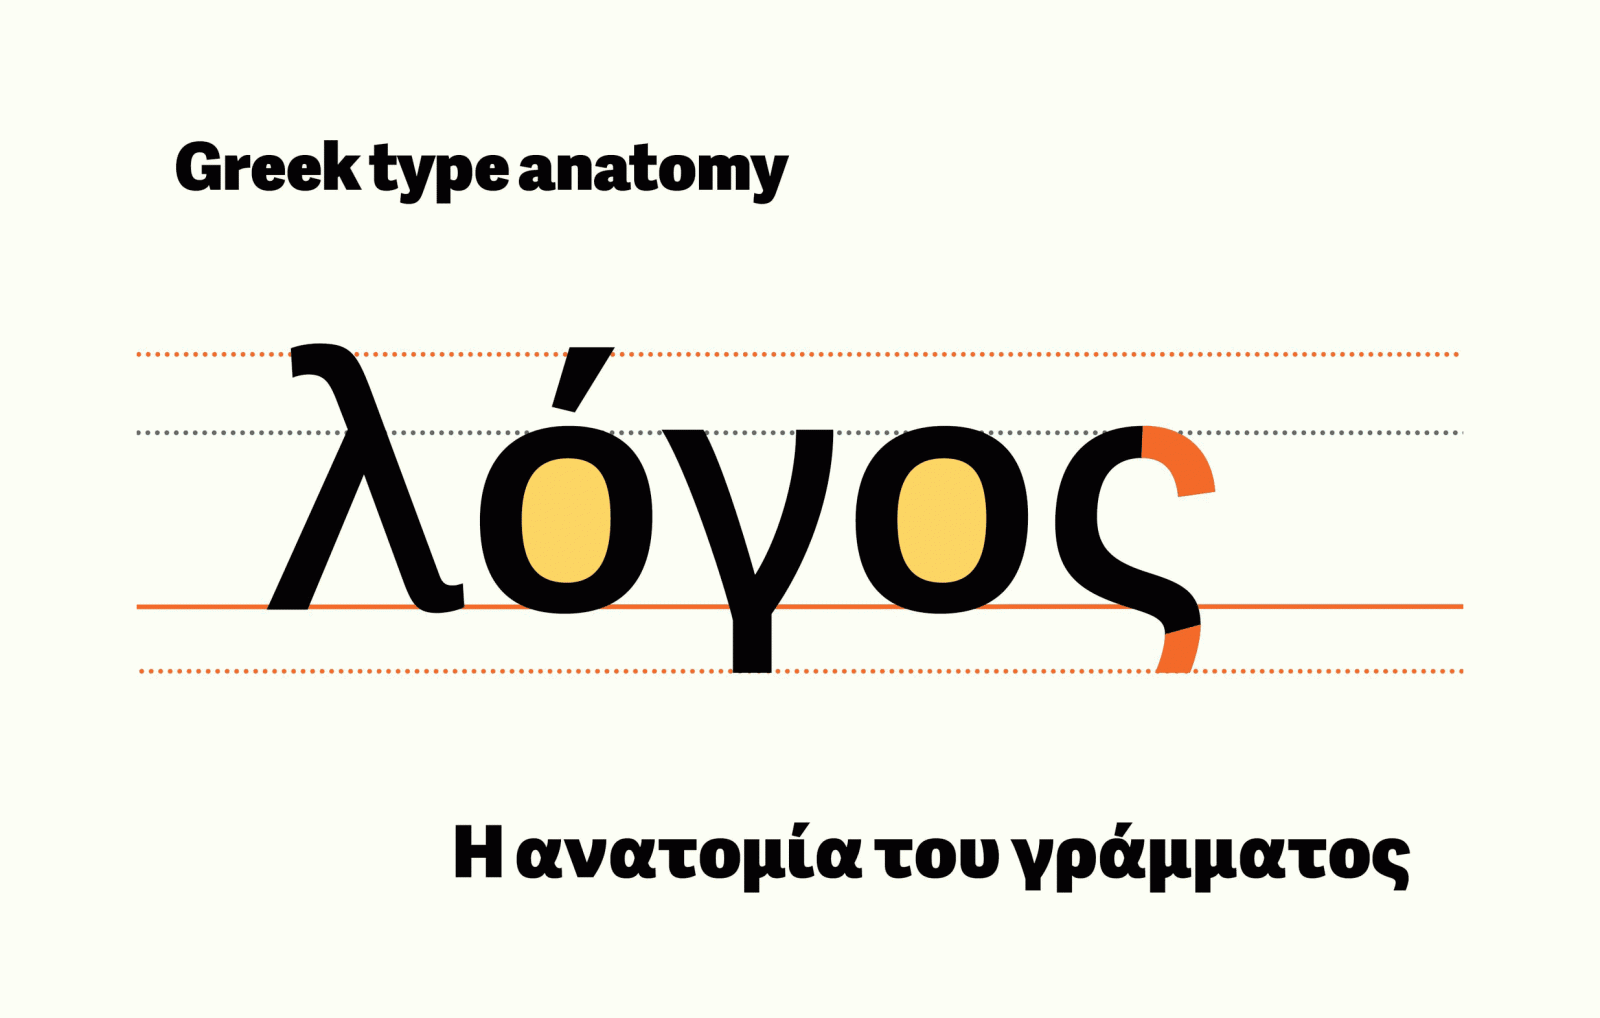 More information about "Greek Type Anatomy"